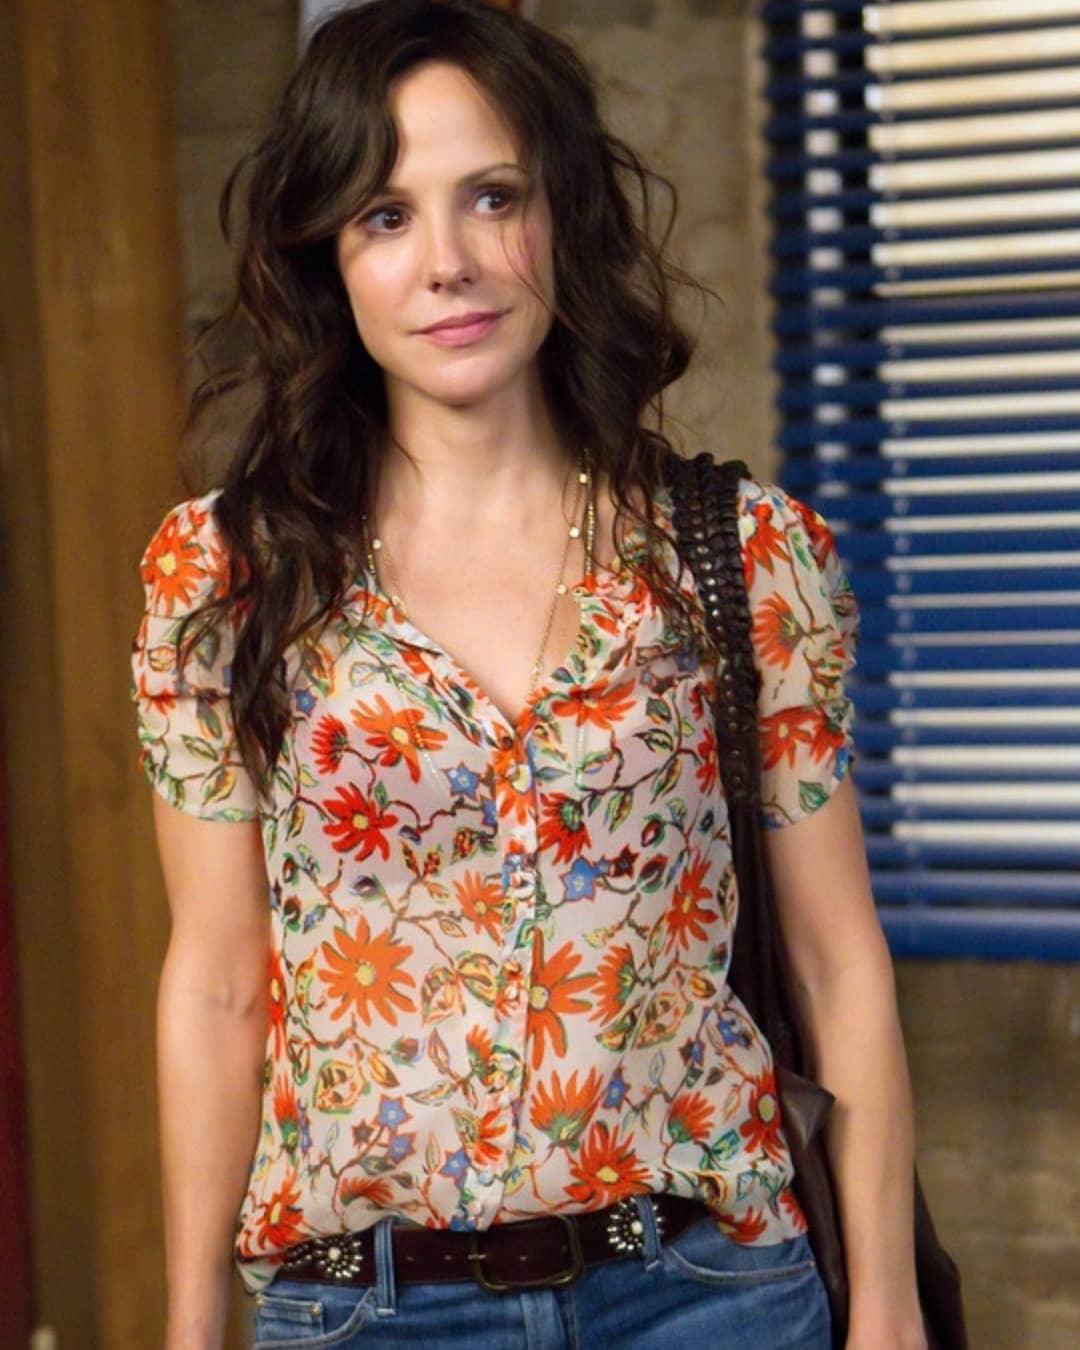 65+ Hot Pictures Of Mary-Louise Parker Are Just Heaven Of Sexiness And Hotness | Best Of Comic Books